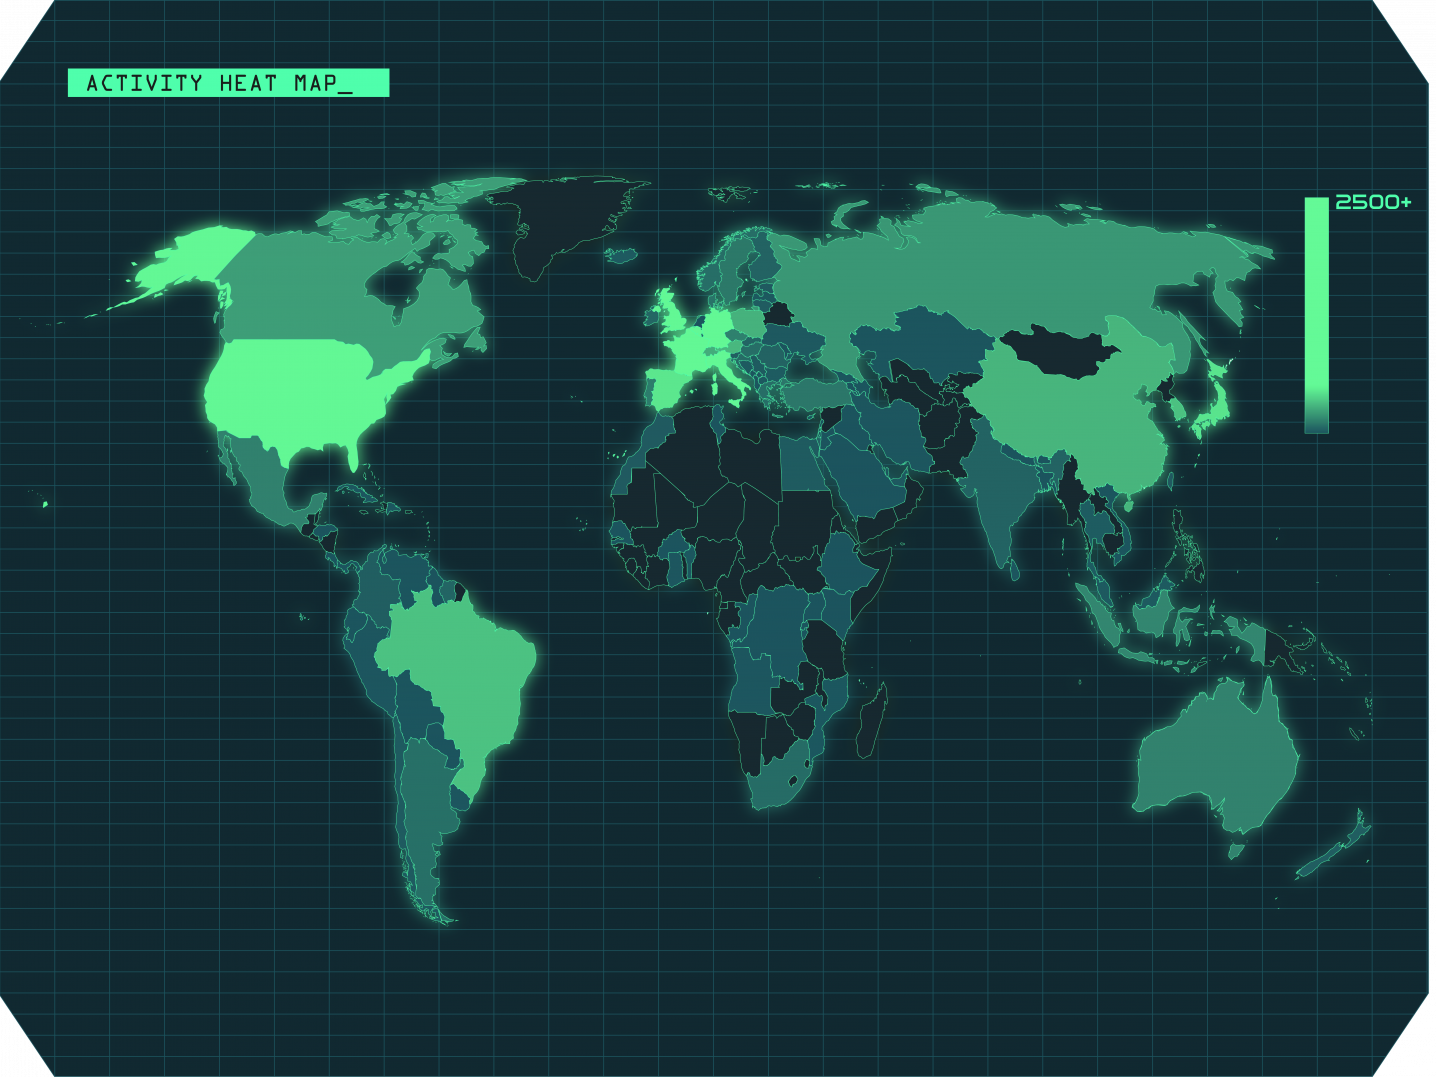 A heat map of the world shows where the most activities have taken place.